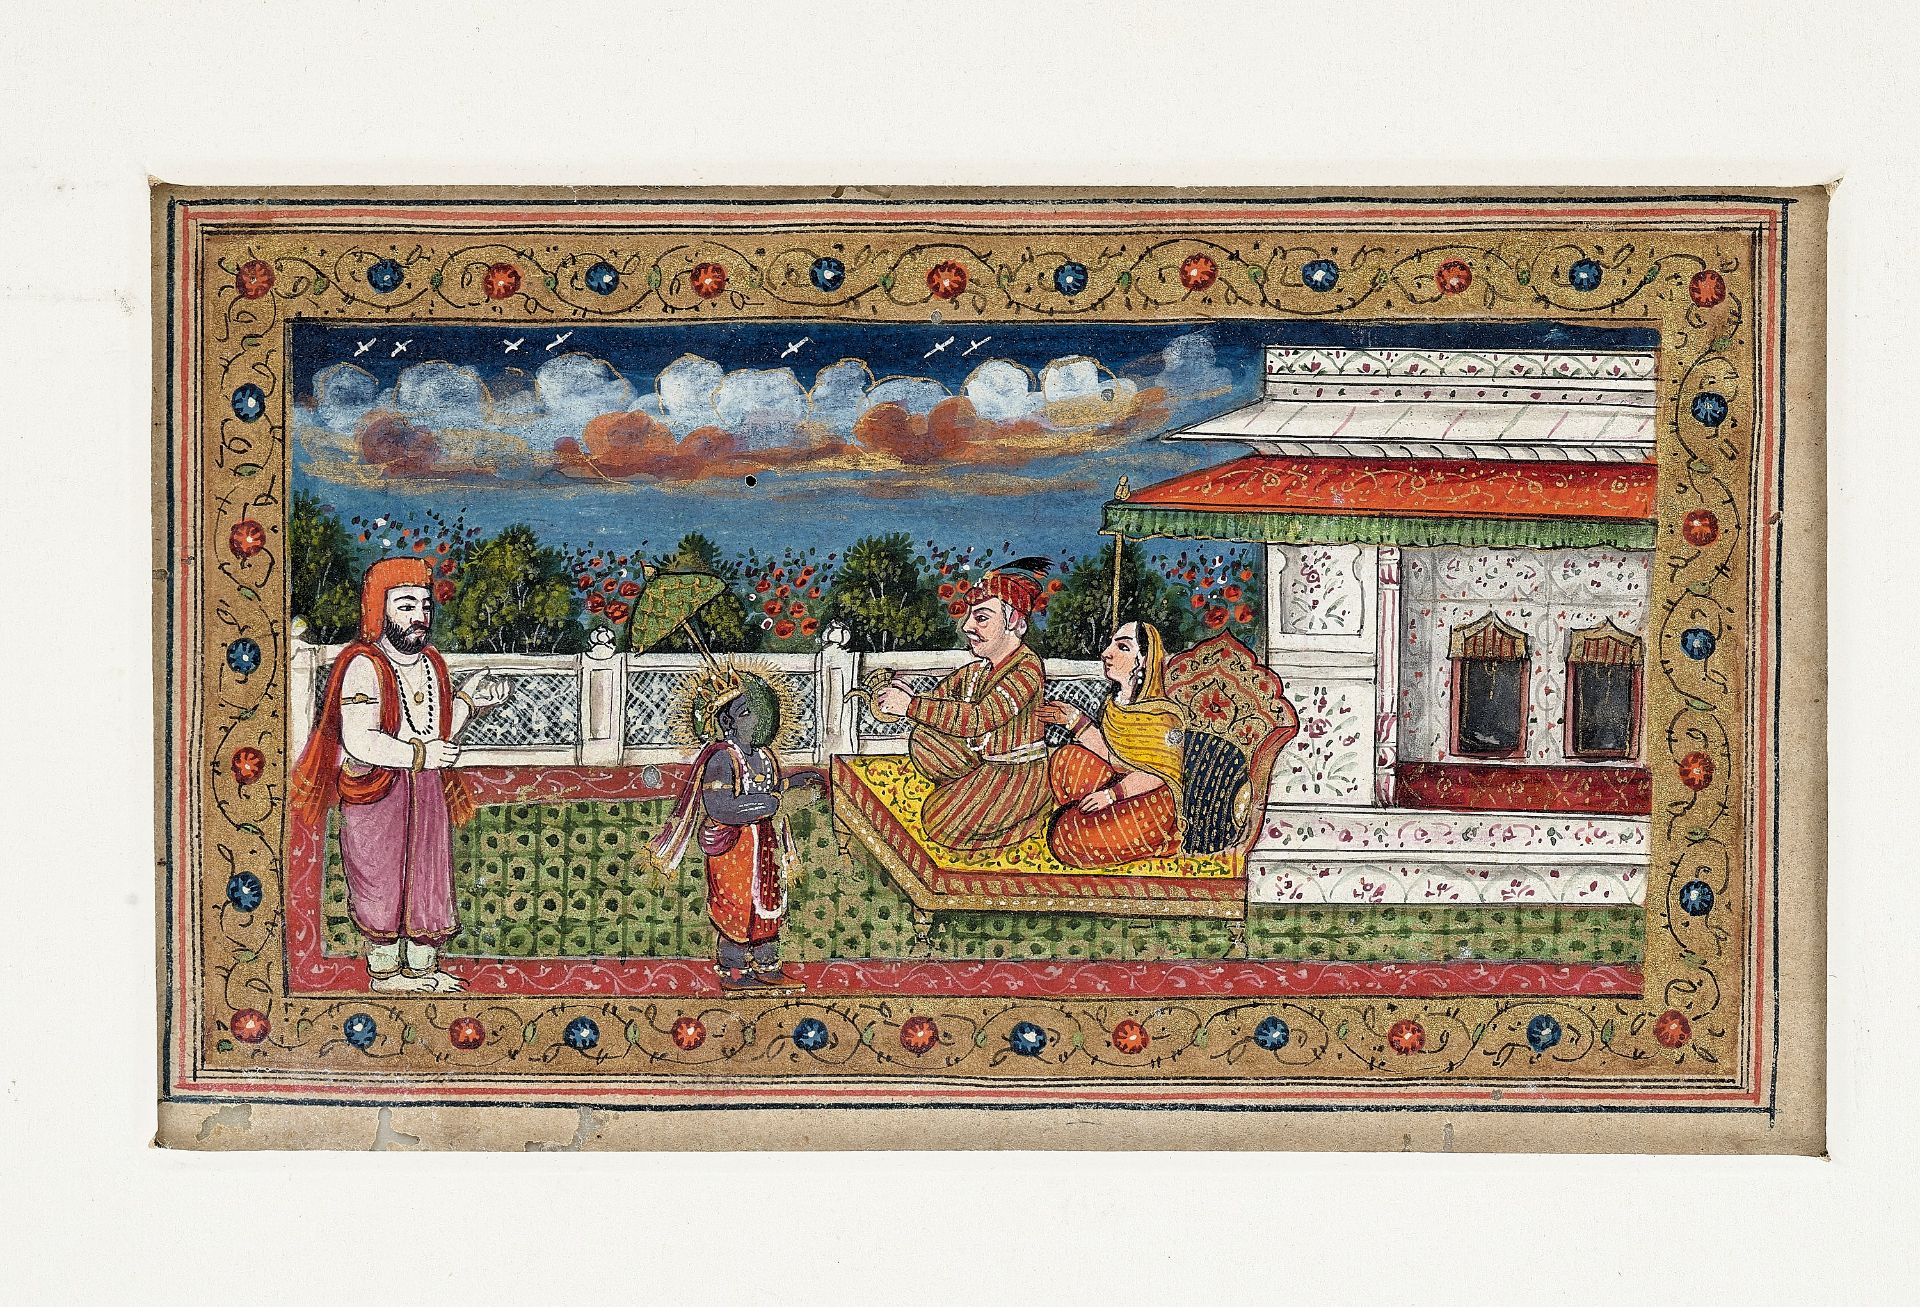 A RARE GROUP OF 27 FOLIOS FROM A MANUSCRIPT, KASHMIR 18TH CENTURY - Image 8 of 15